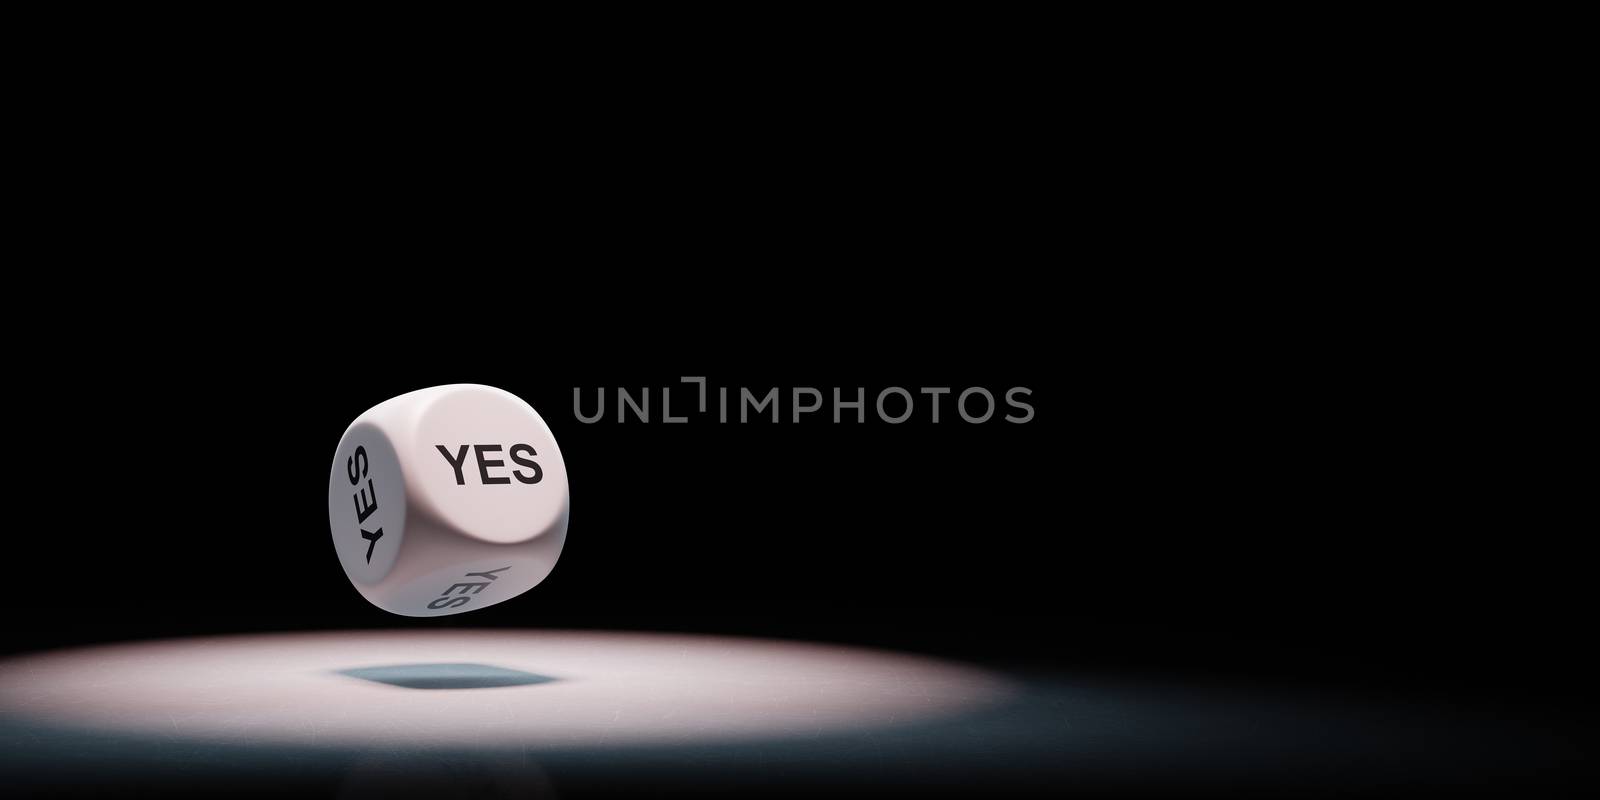 Yes Text Dice Spotlighted on Black Background by make